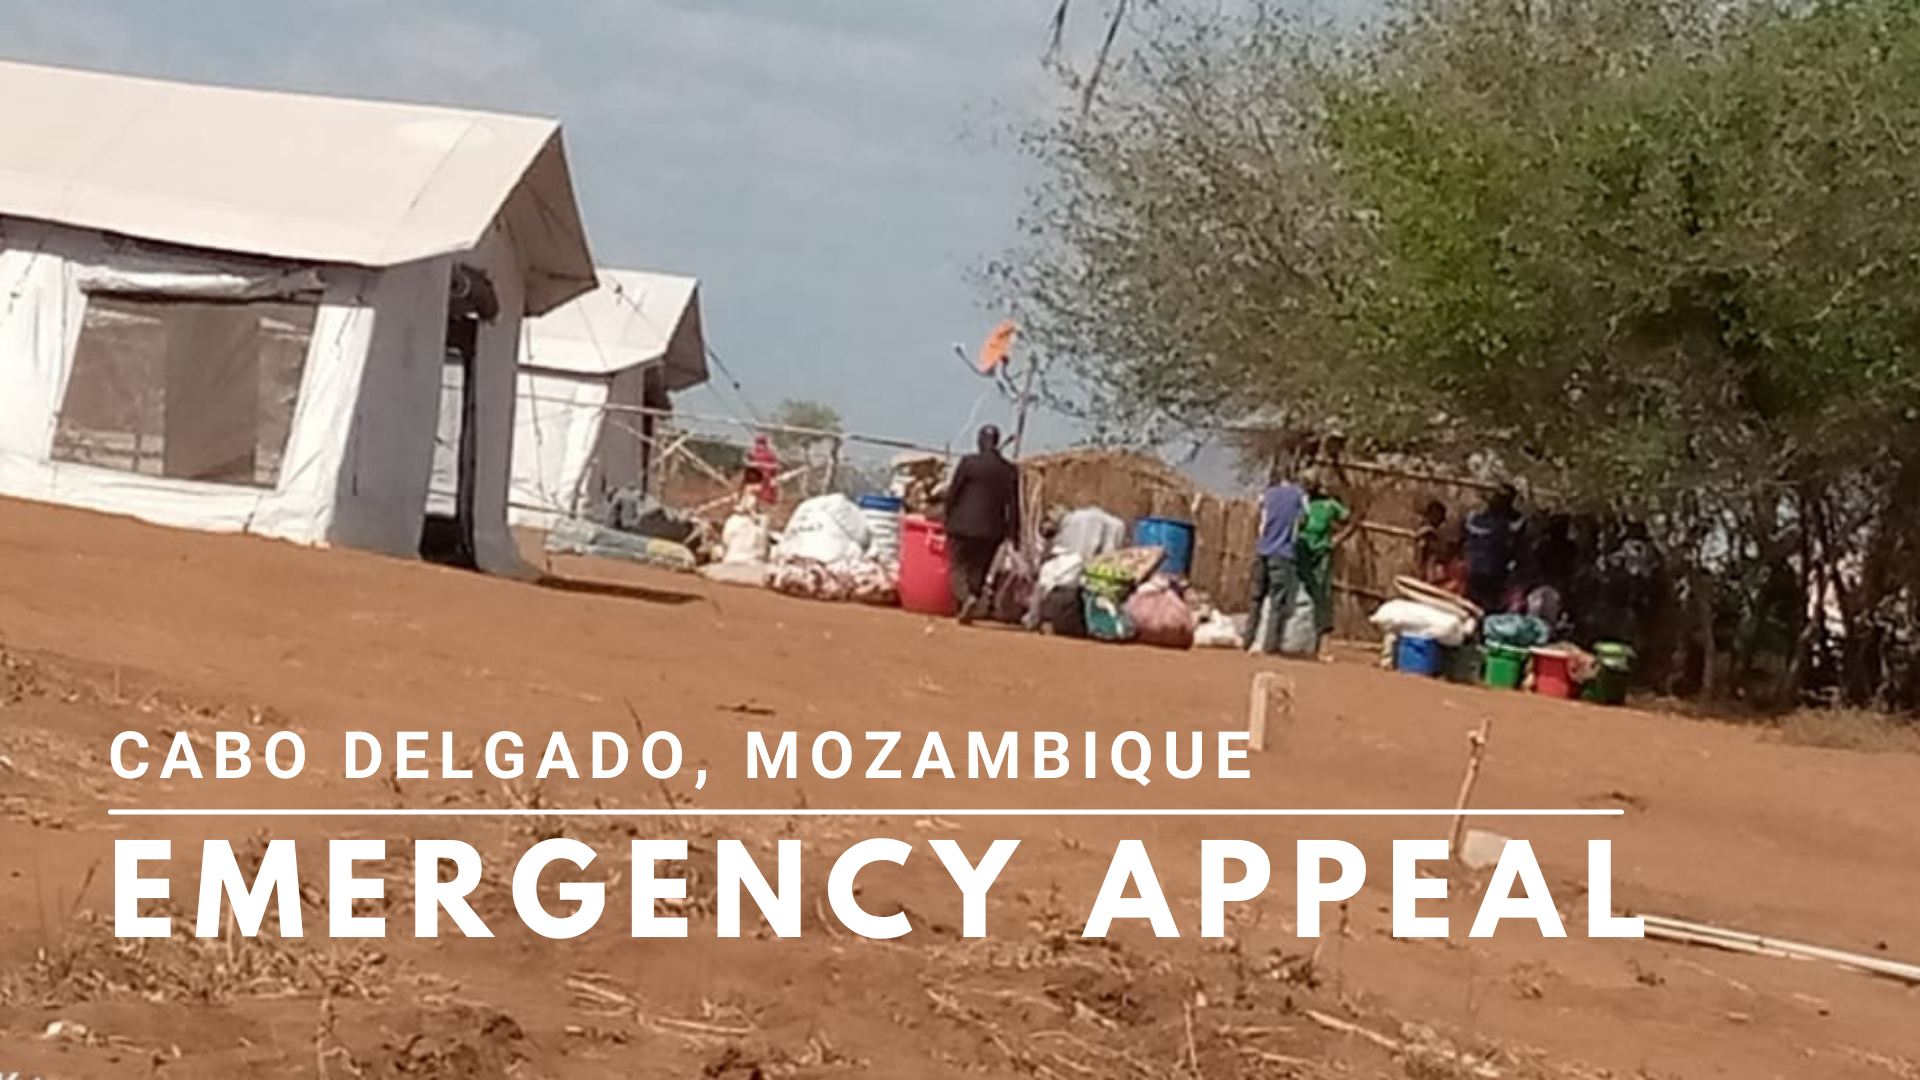 You are currently viewing Cabo Delgado Emergency Appeal